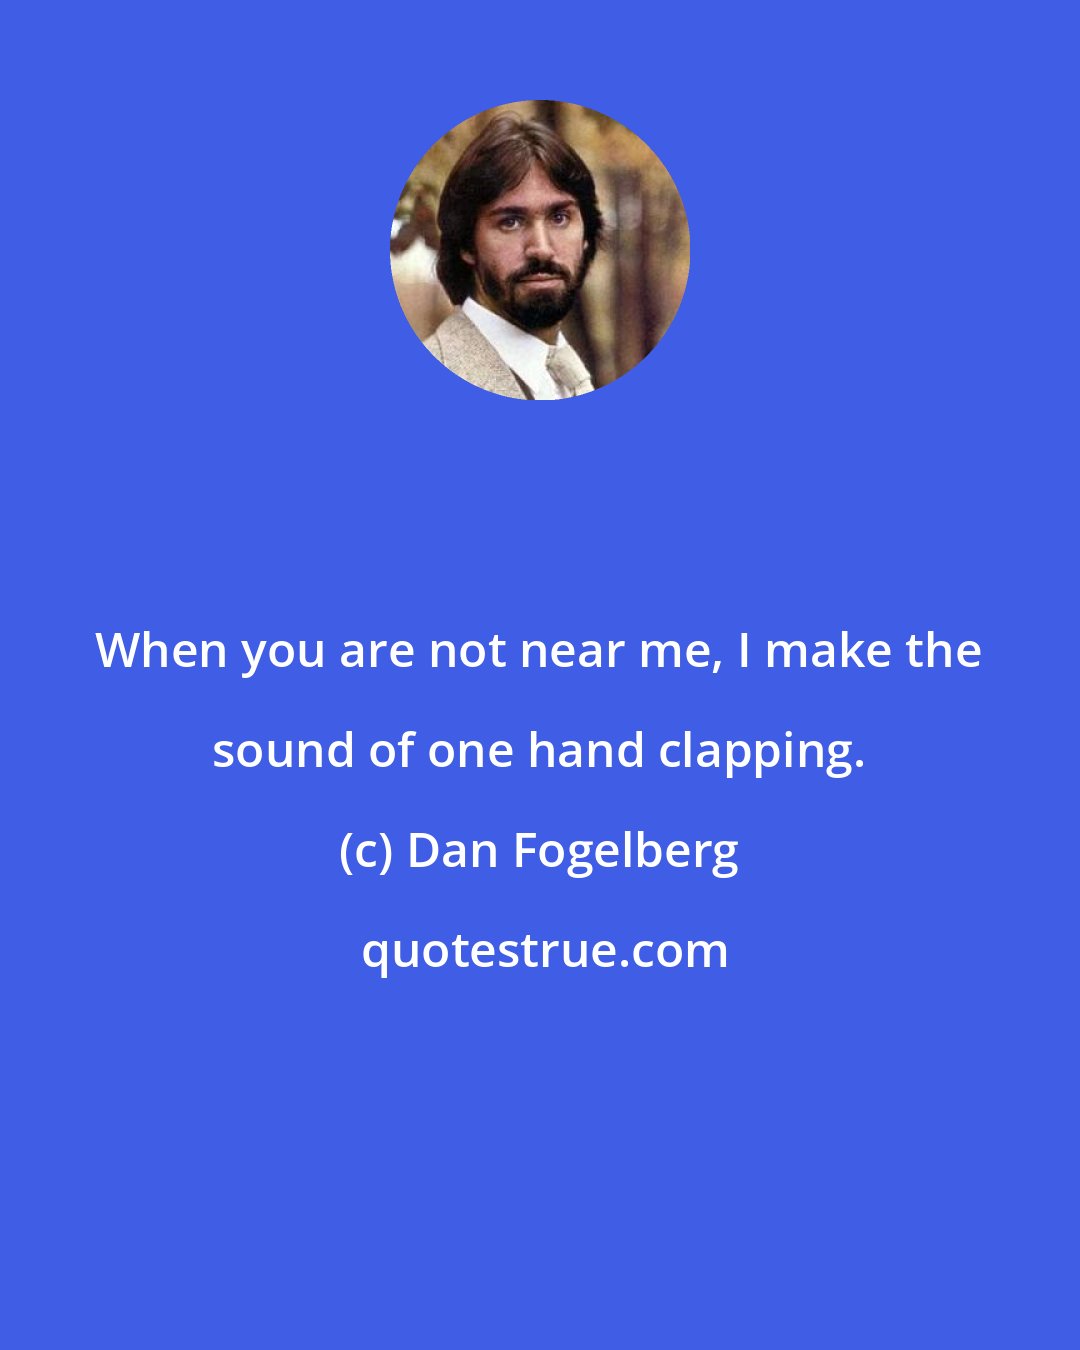 Dan Fogelberg: When you are not near me, I make the sound of one hand clapping.